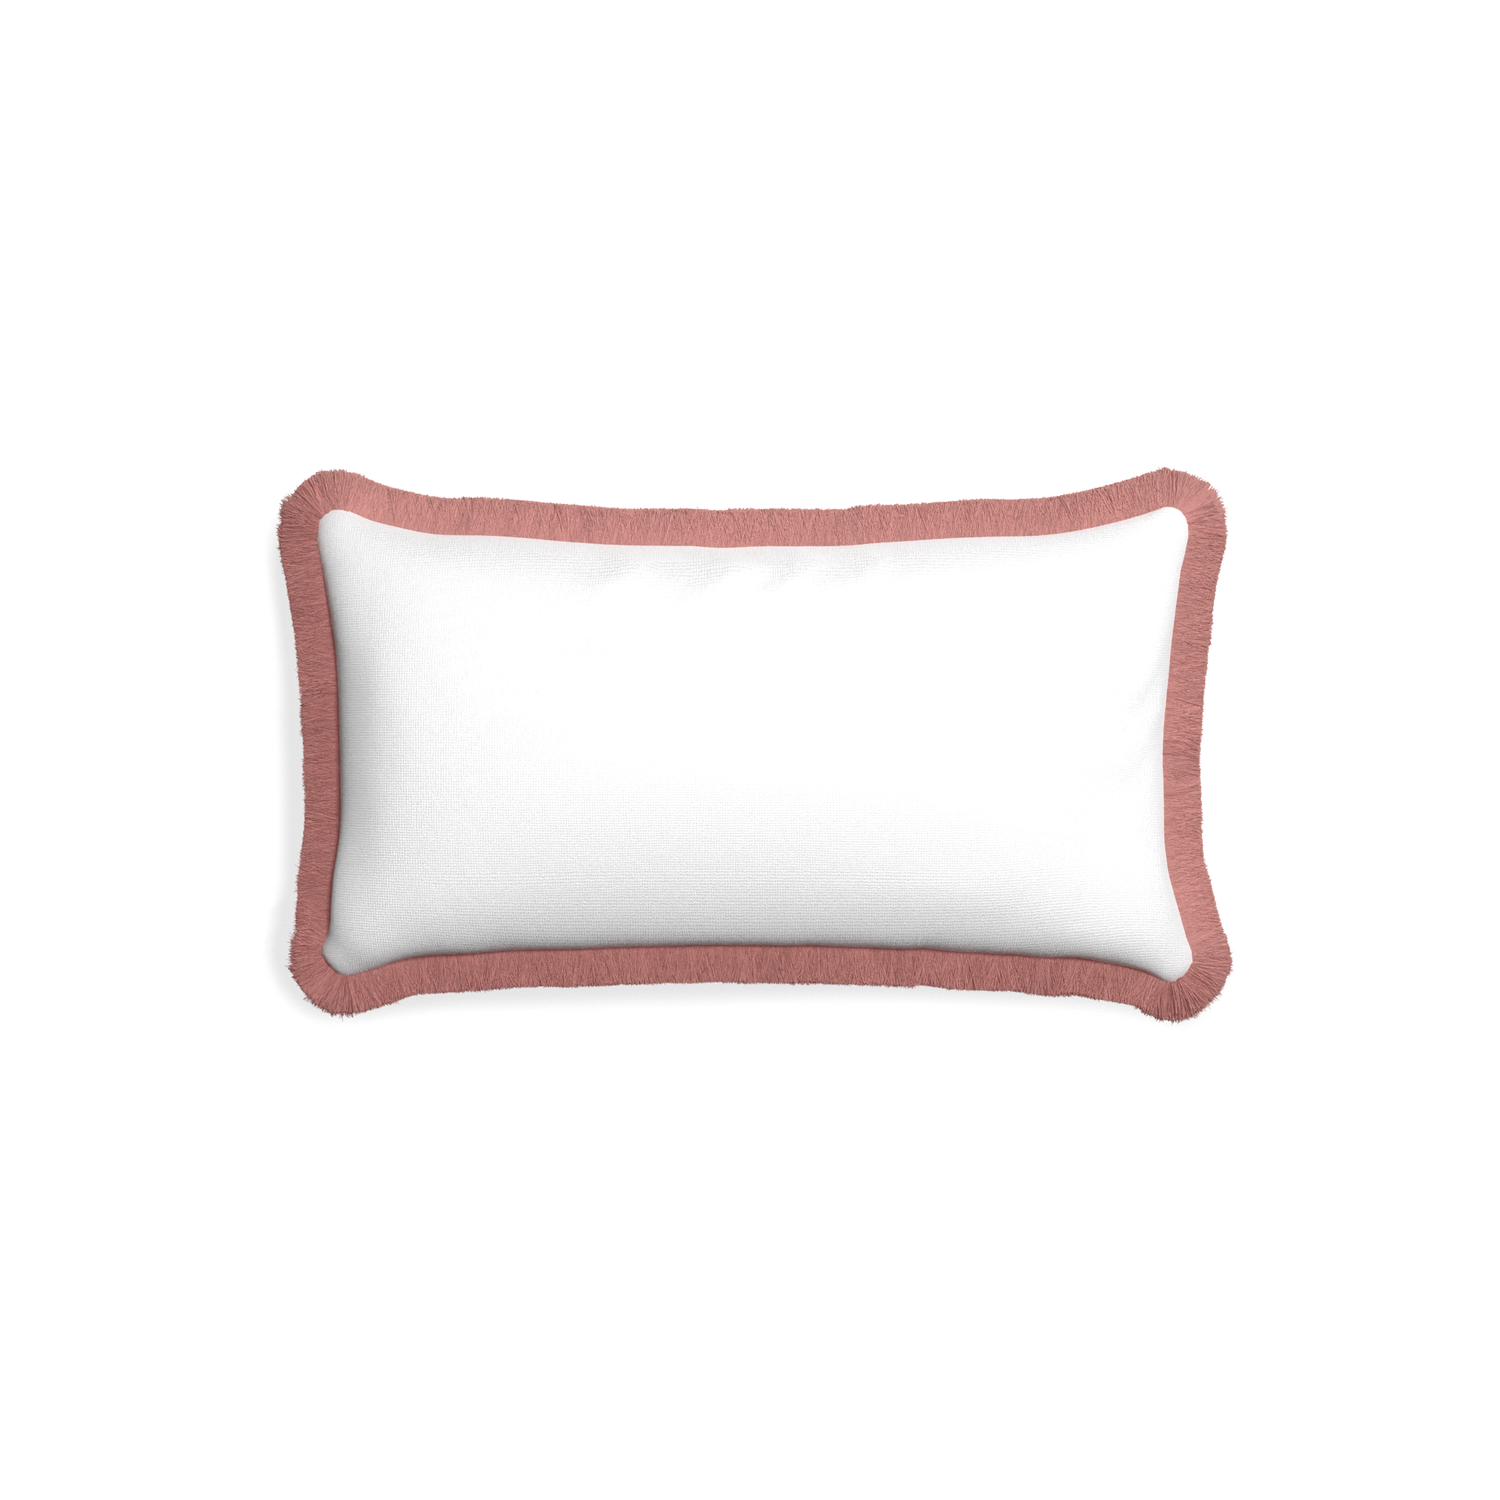 Petite-lumbar snow custom white cottonpillow with d fringe on white background